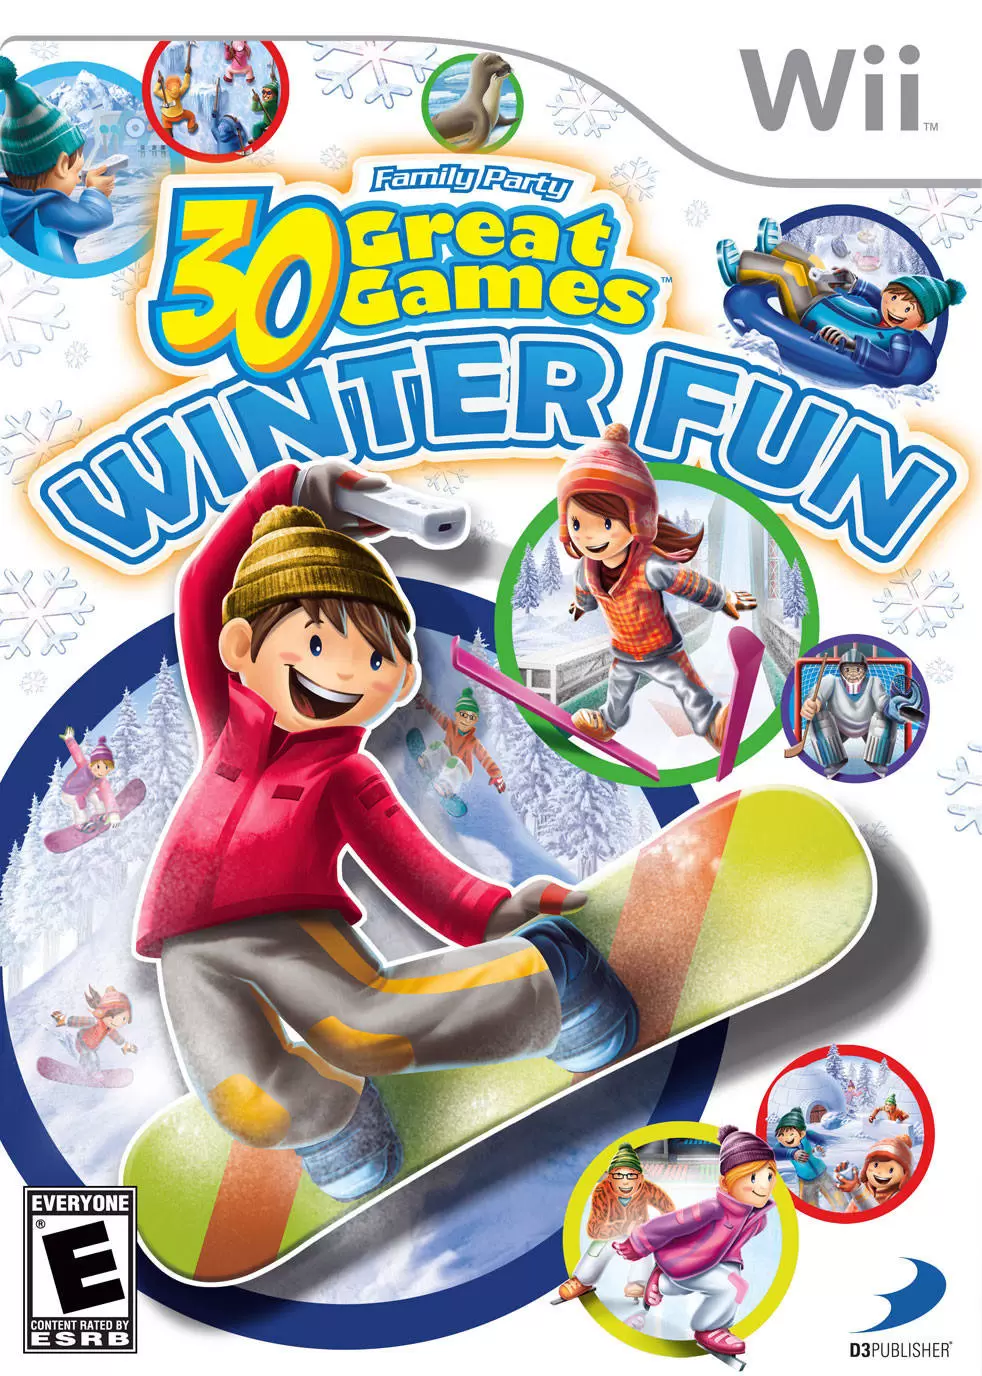 Jeux Nintendo Wii - Family Party: 30 Great Games - Winter Fun